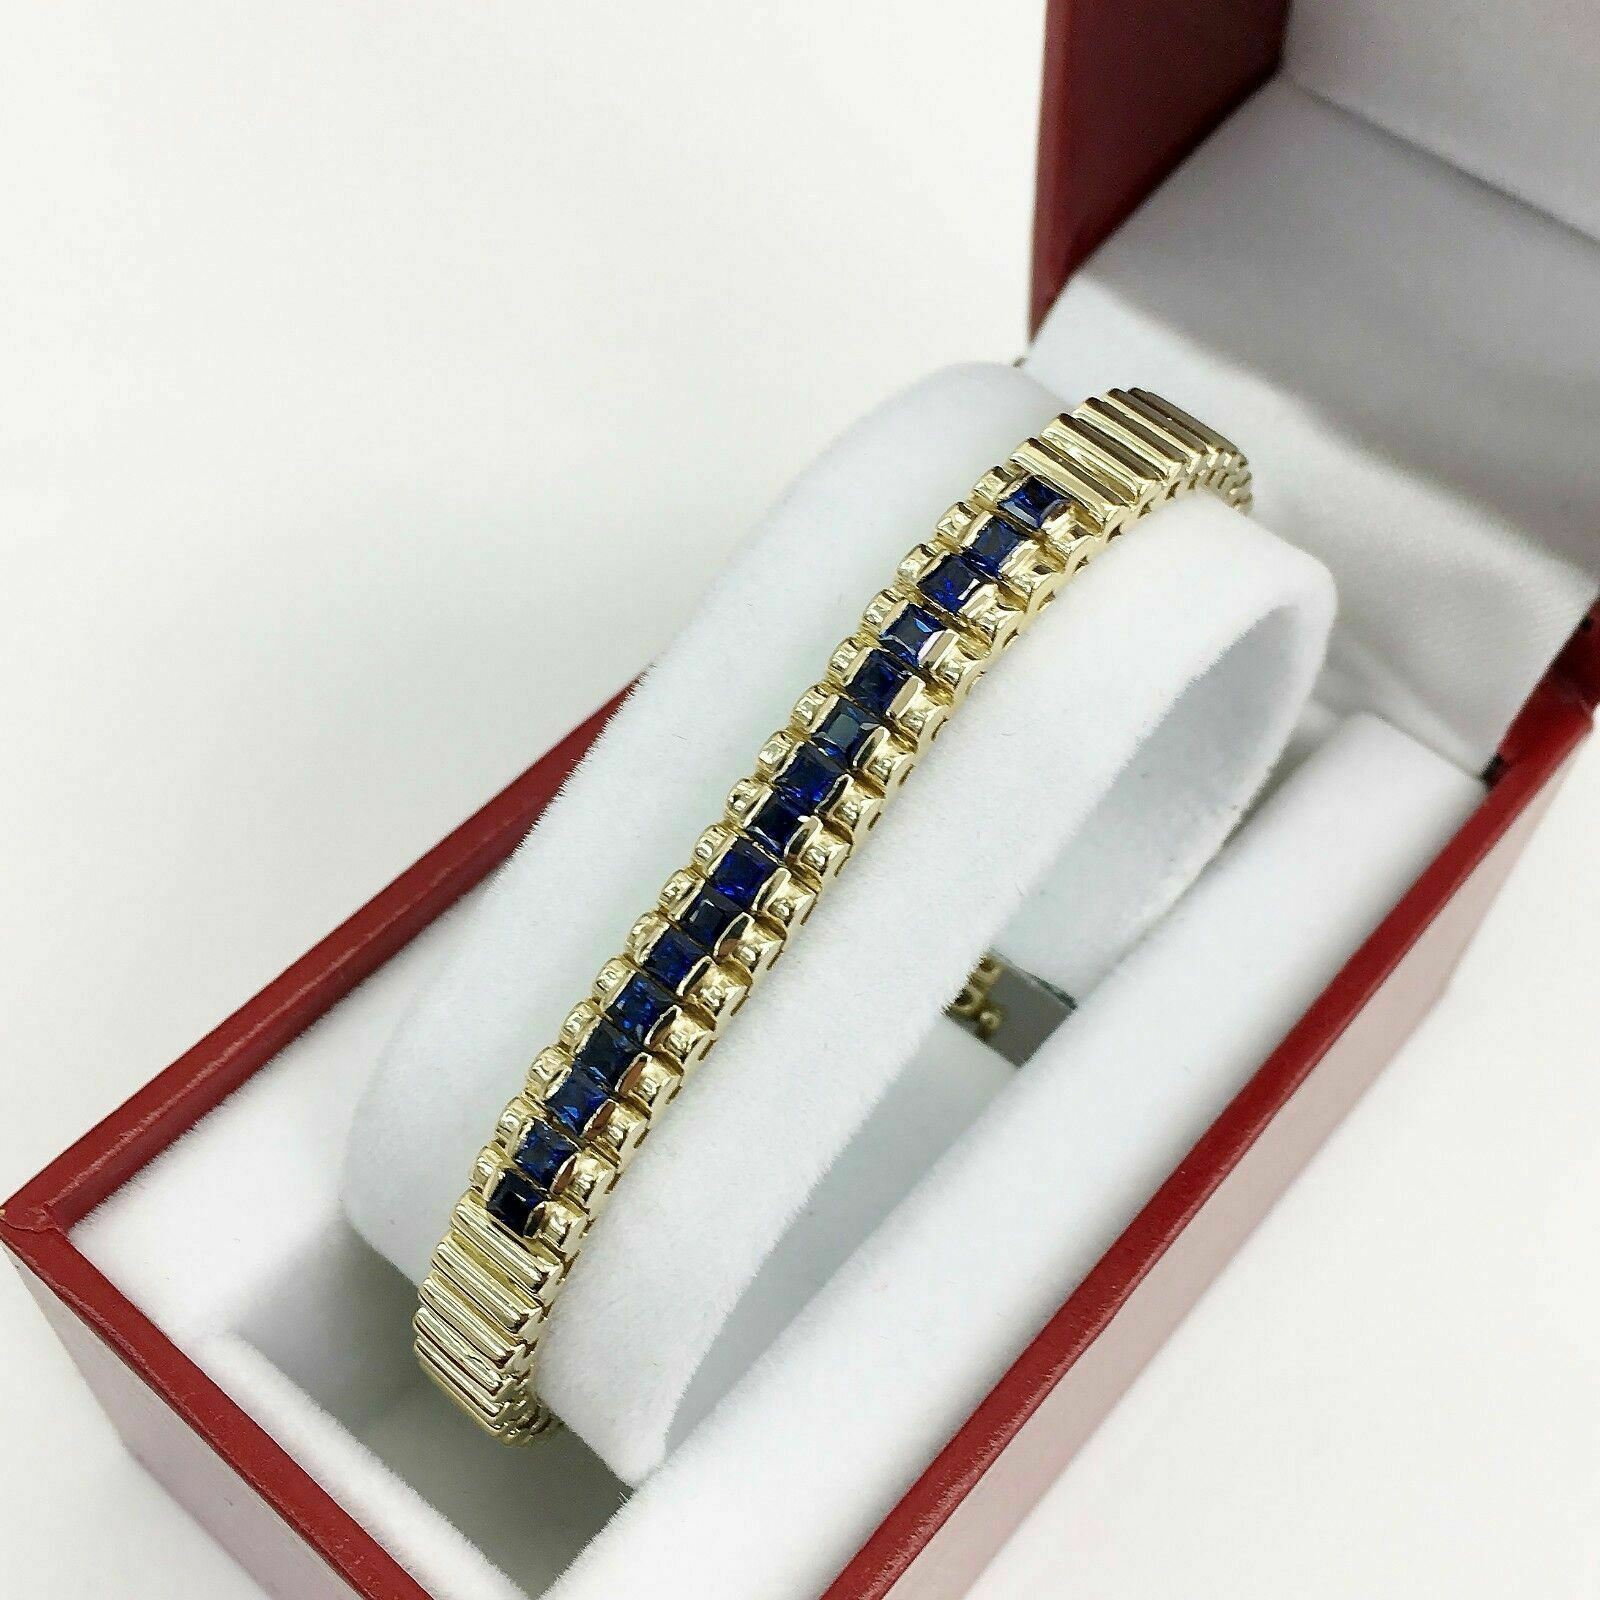 2.25Carats t.w. Bankers Sapphire Tennis Bracelet Custom Made 14K Yellow Gold